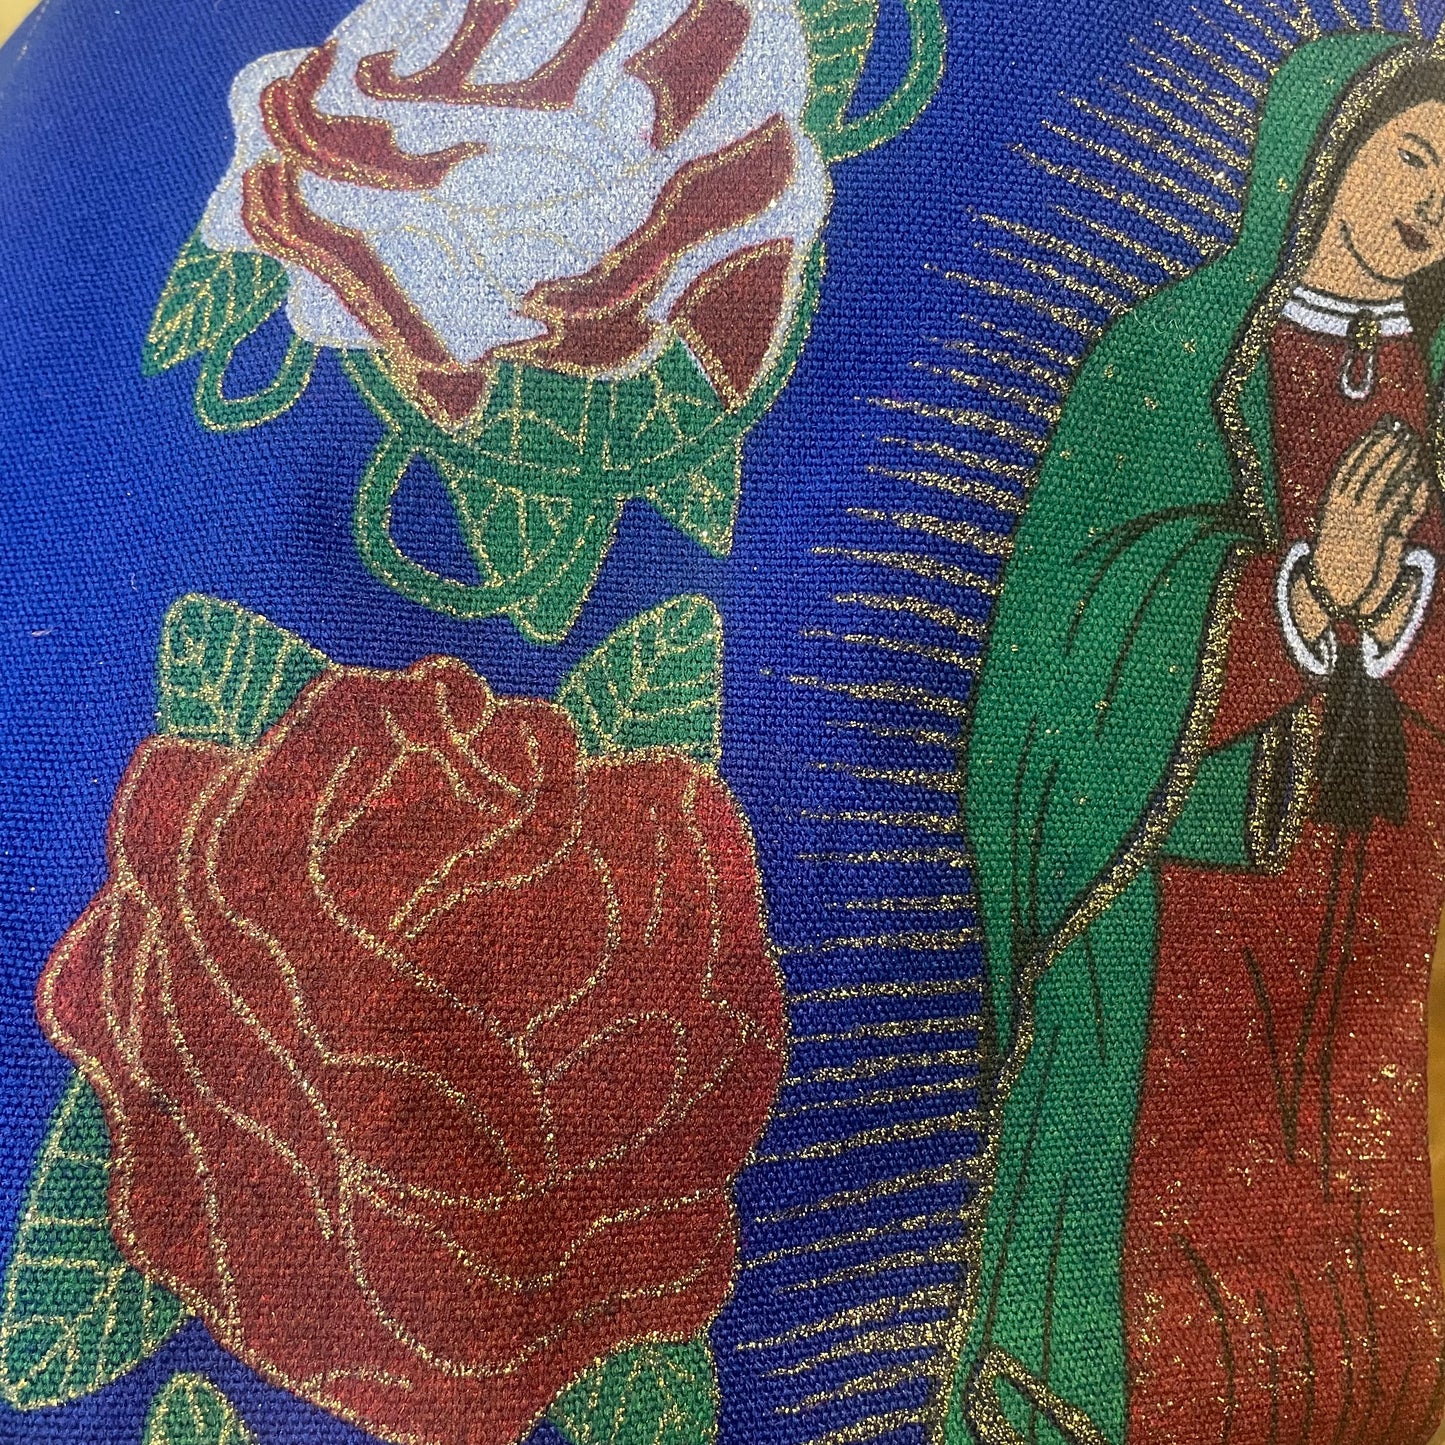 Our Lady of Guadalupe Shawl